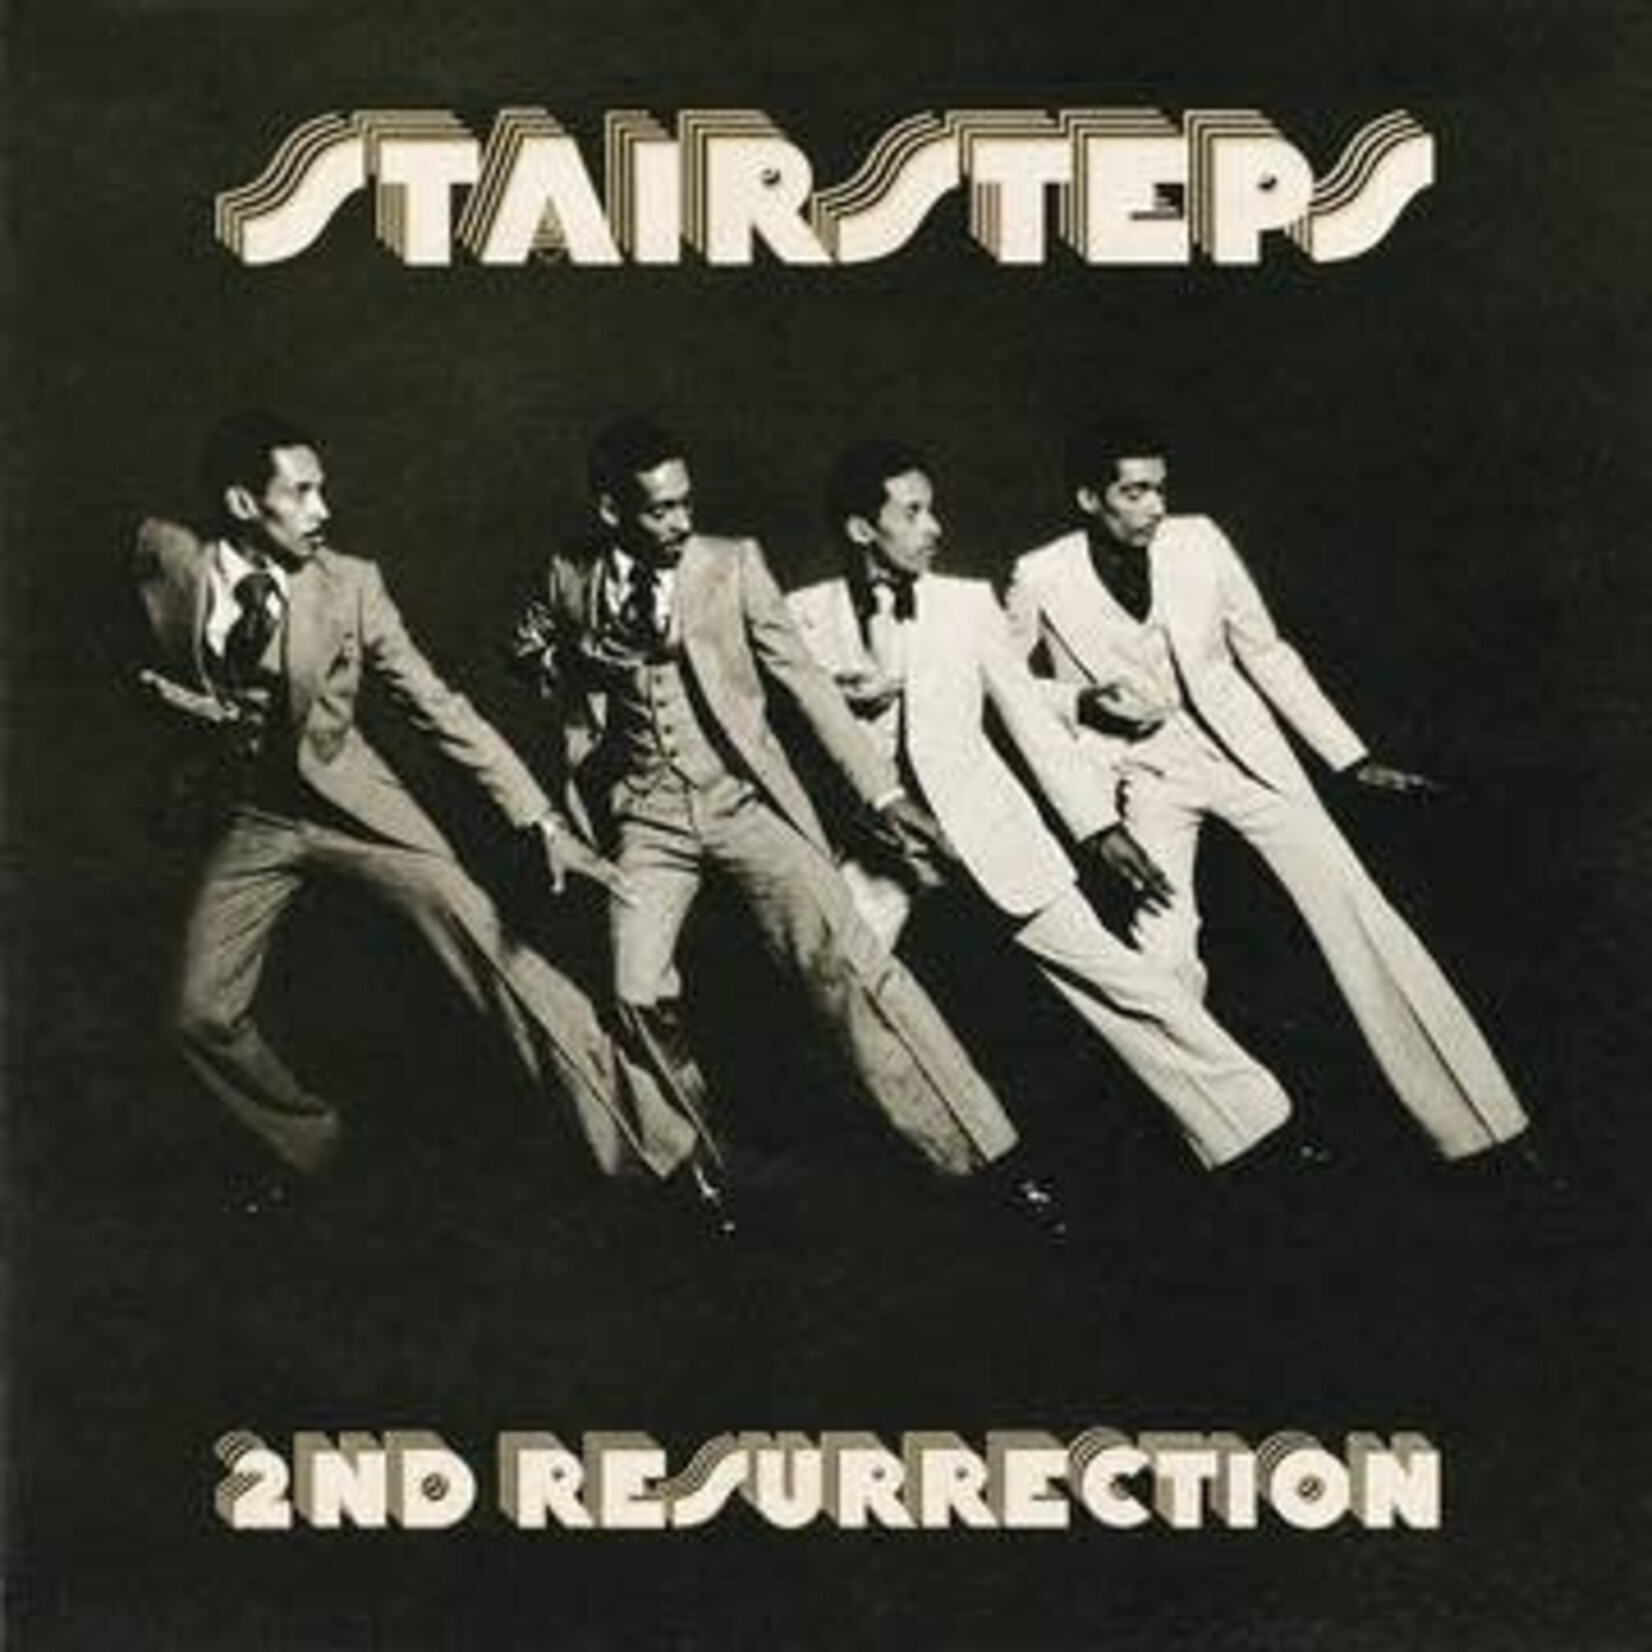 Stairsteps - 2nd Ressurection (Gold Vinyl) [LP] (RSD2023)